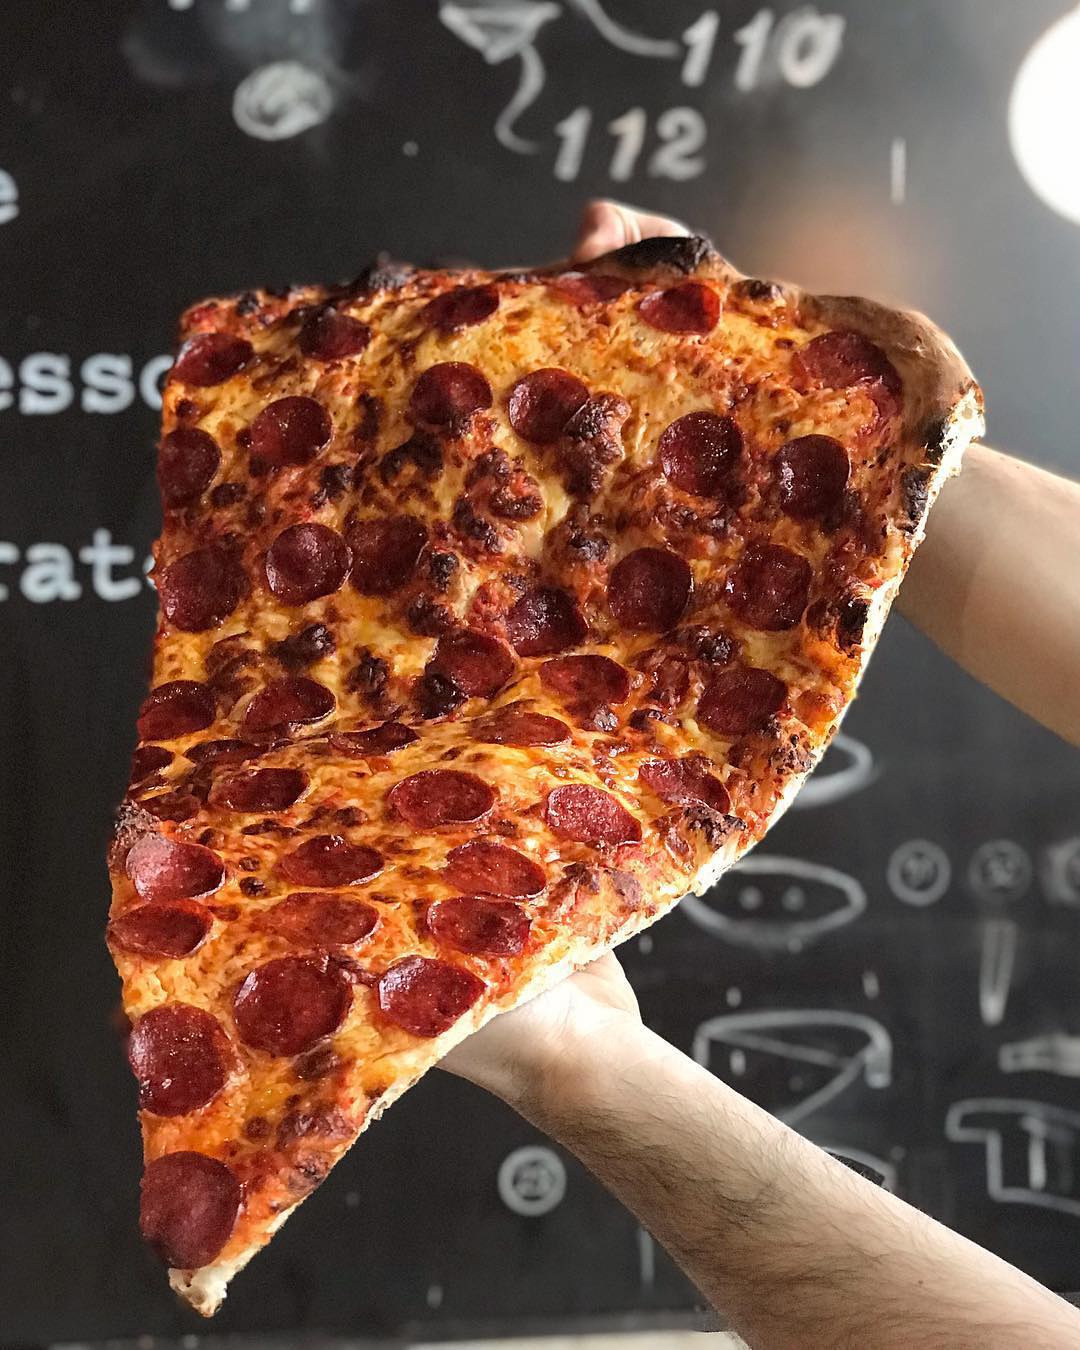 Creative pizza combinations | New Foodie Trend Is A Giant Pizza Slice – The Biggest You've Seen | Her Beauty